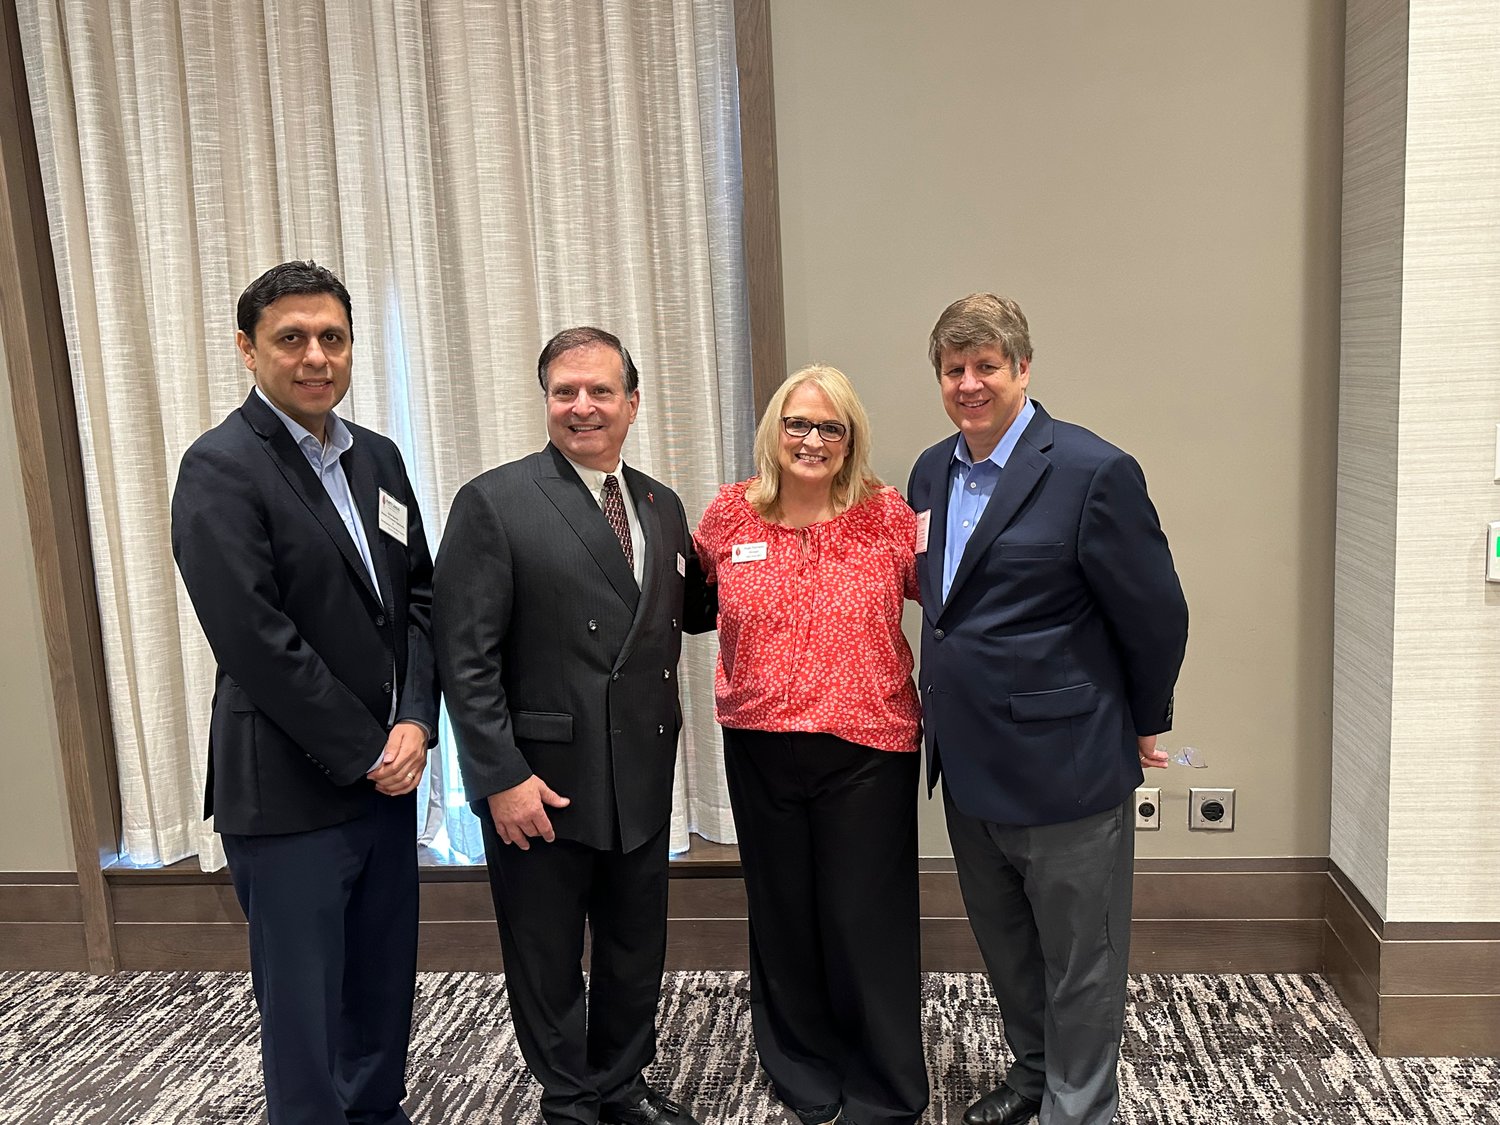 Carlos Guzman, Fort Bend County director of economic opportunity and development; Paul Kurt, Katy Area EDC chairman; Angie Thomason, Katy Area EDC president/CEO; and Patrick Jankowski, Greater Houston Partnership senior vice president of research, pose for a photo at the Katy Area EDC meeting.